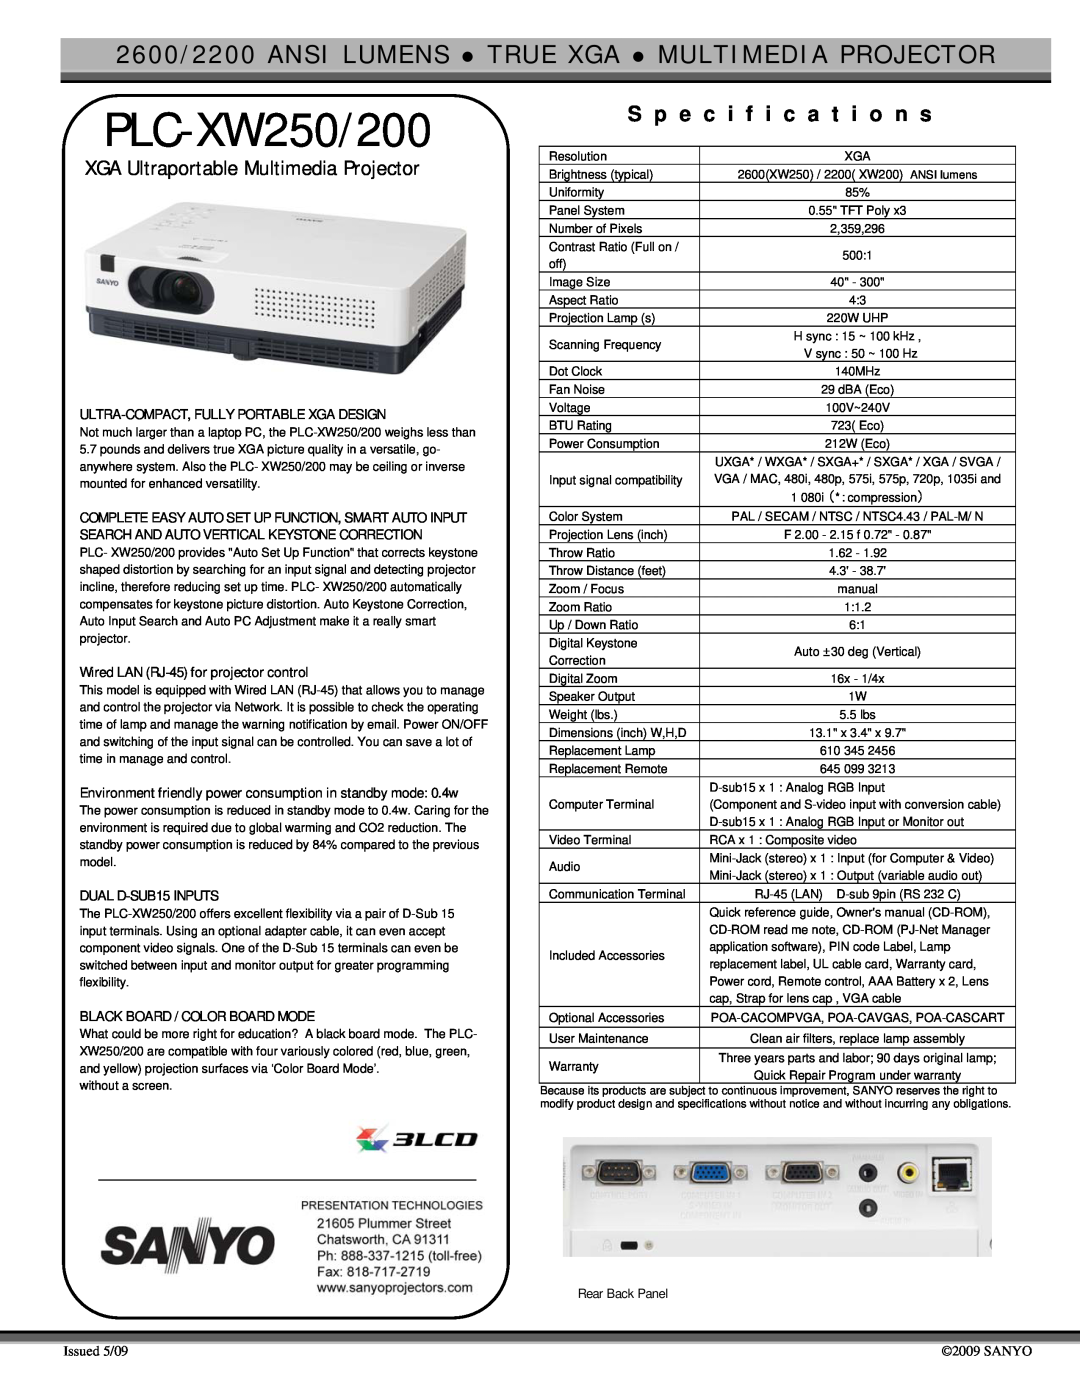 Sanyo specifications High Cost Performance with Easy Setup Function, PLC-XW2502600 lumens PLC-XW2002200 lumens 